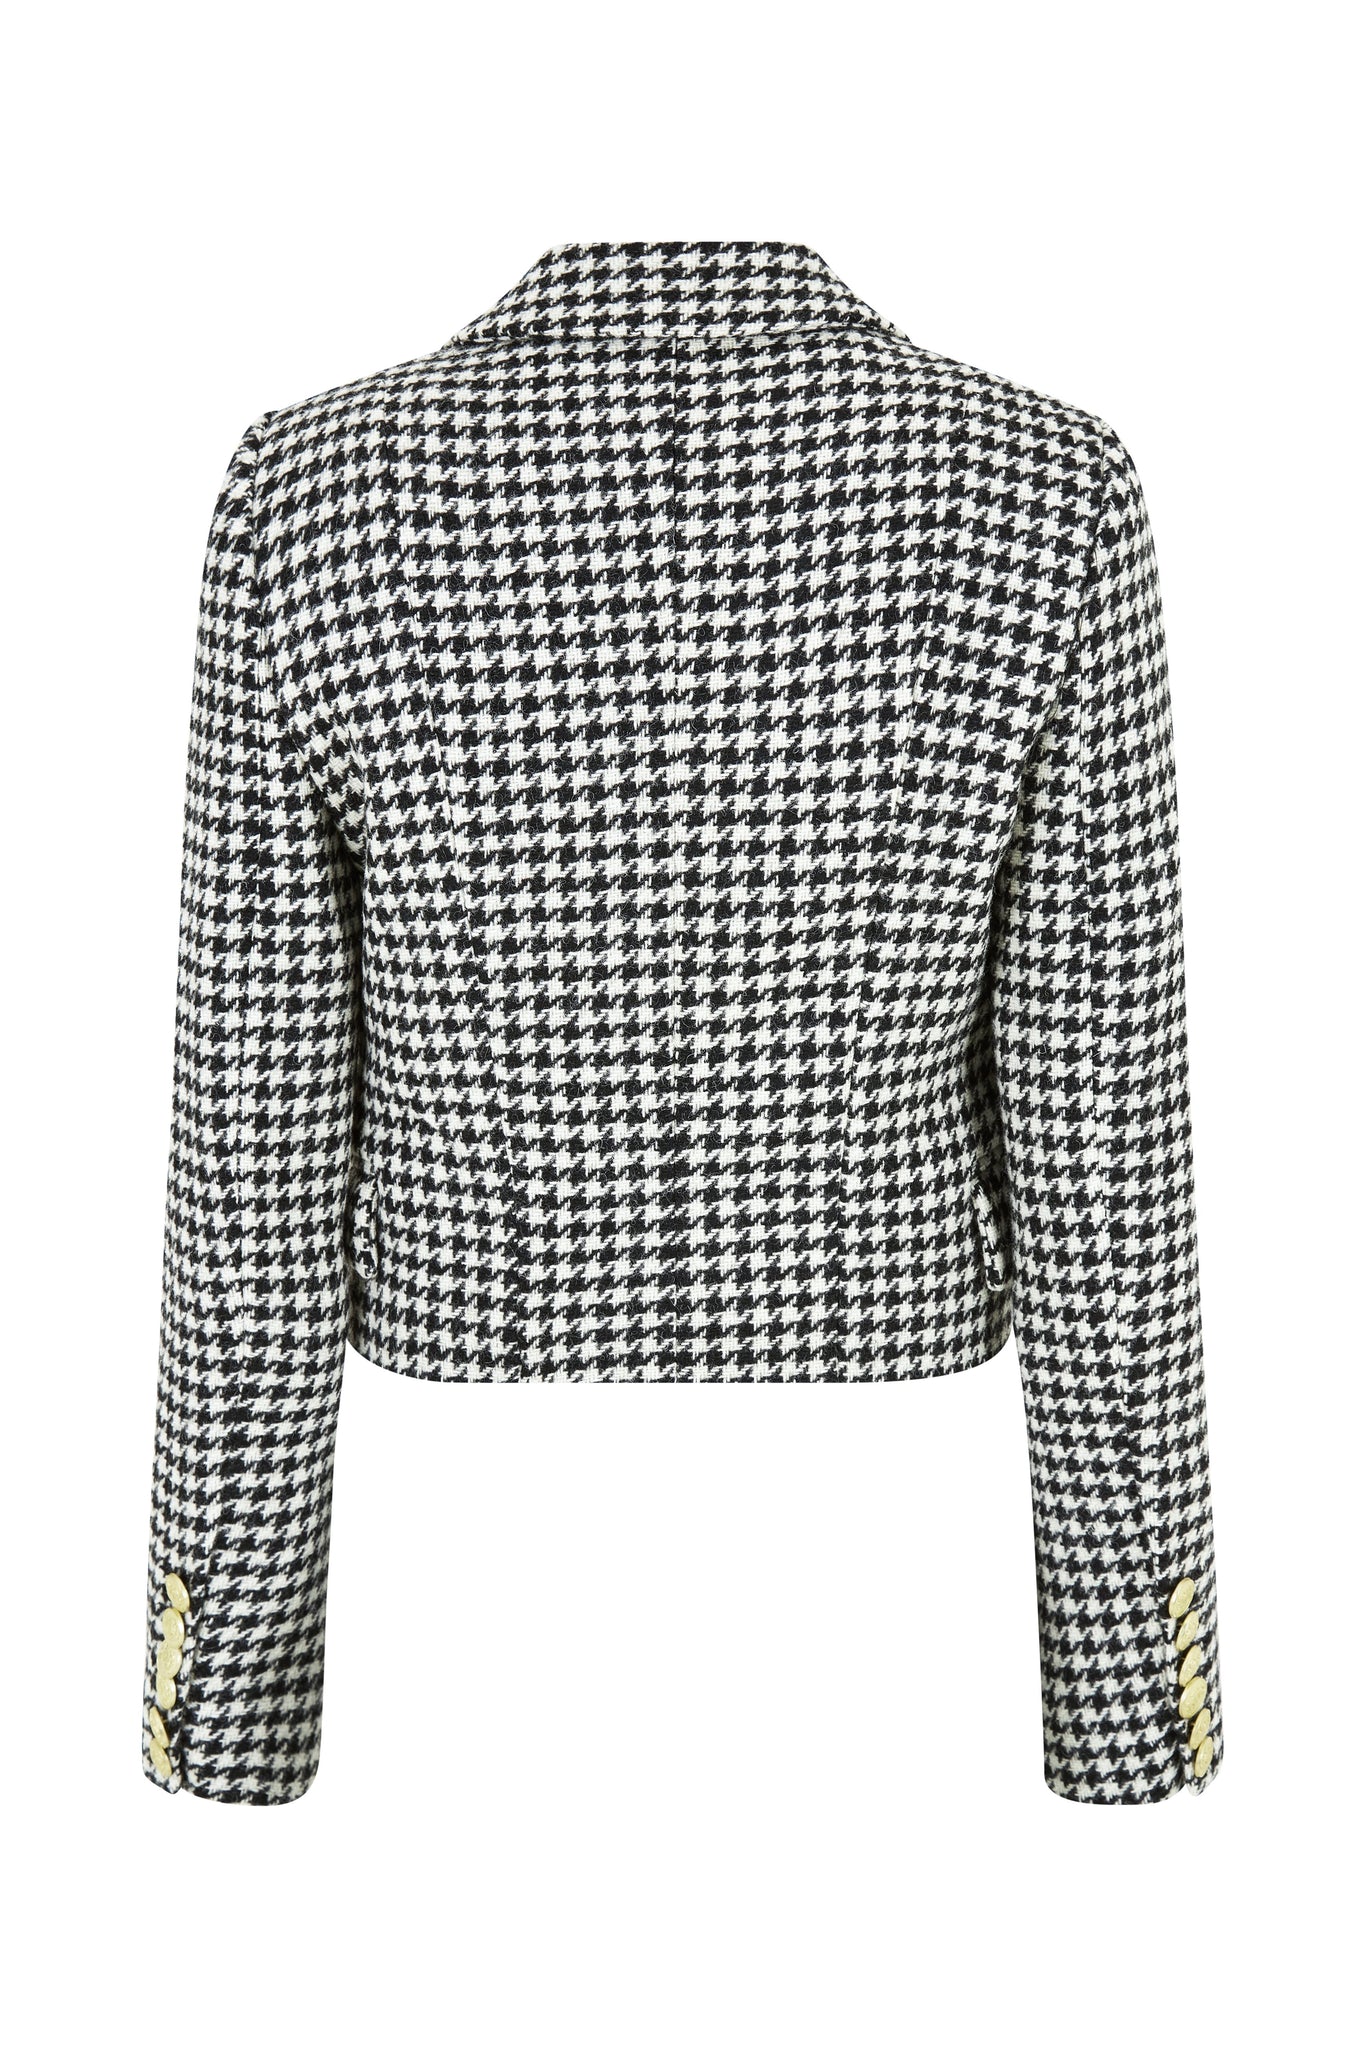 back of British made tailored cropped jacket in black and white houndstooth with welt pockets and gold button detail down the front and on sleeves